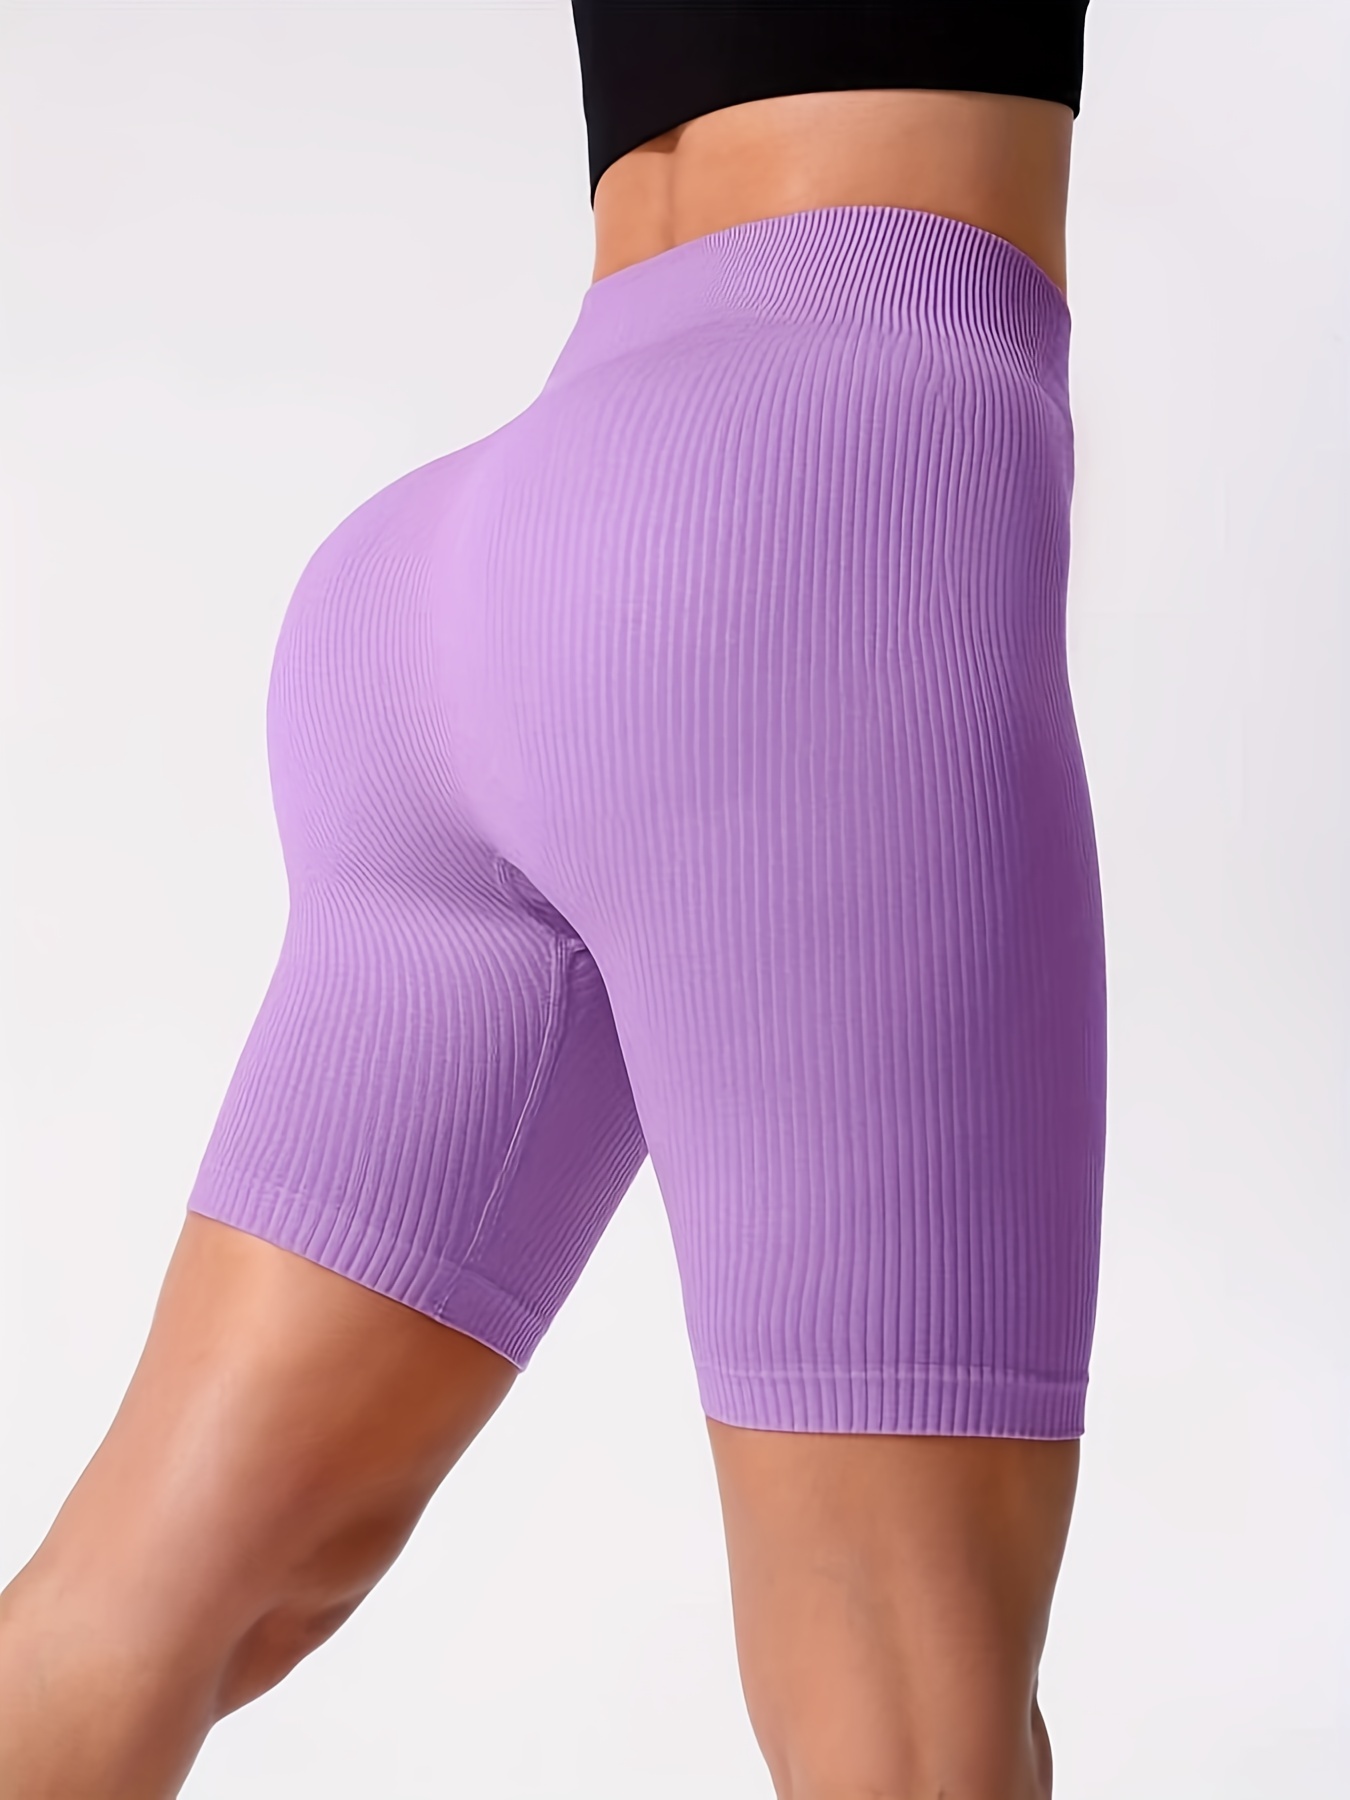 High Waist Yoga Shorts Women Solid Color Ribbed Fitness